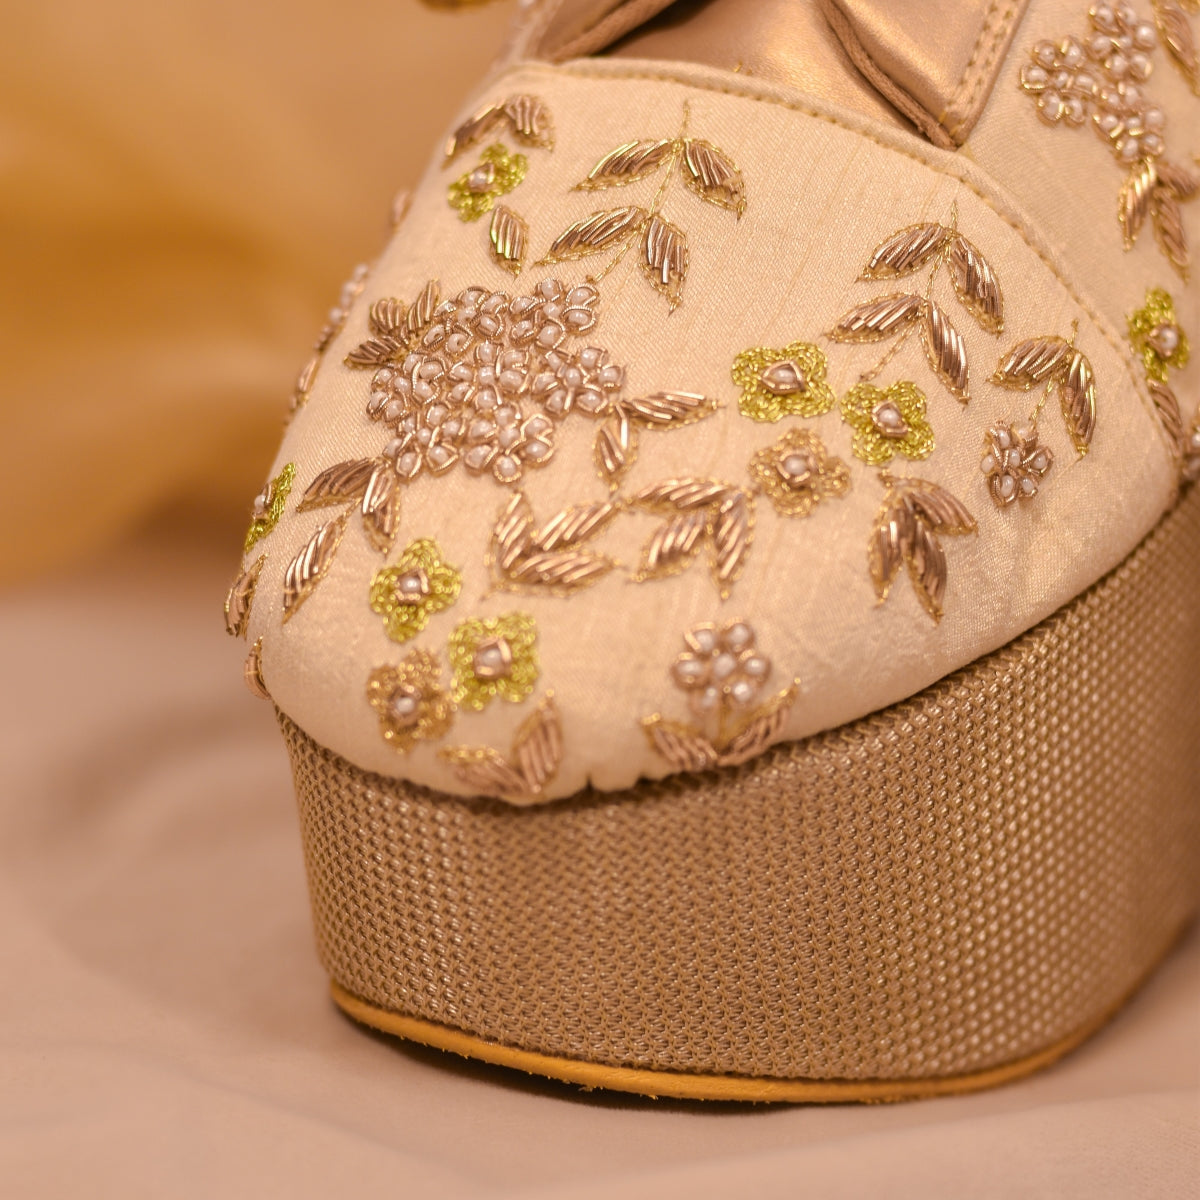 Lace up wedding sneakers in golden with embroidery